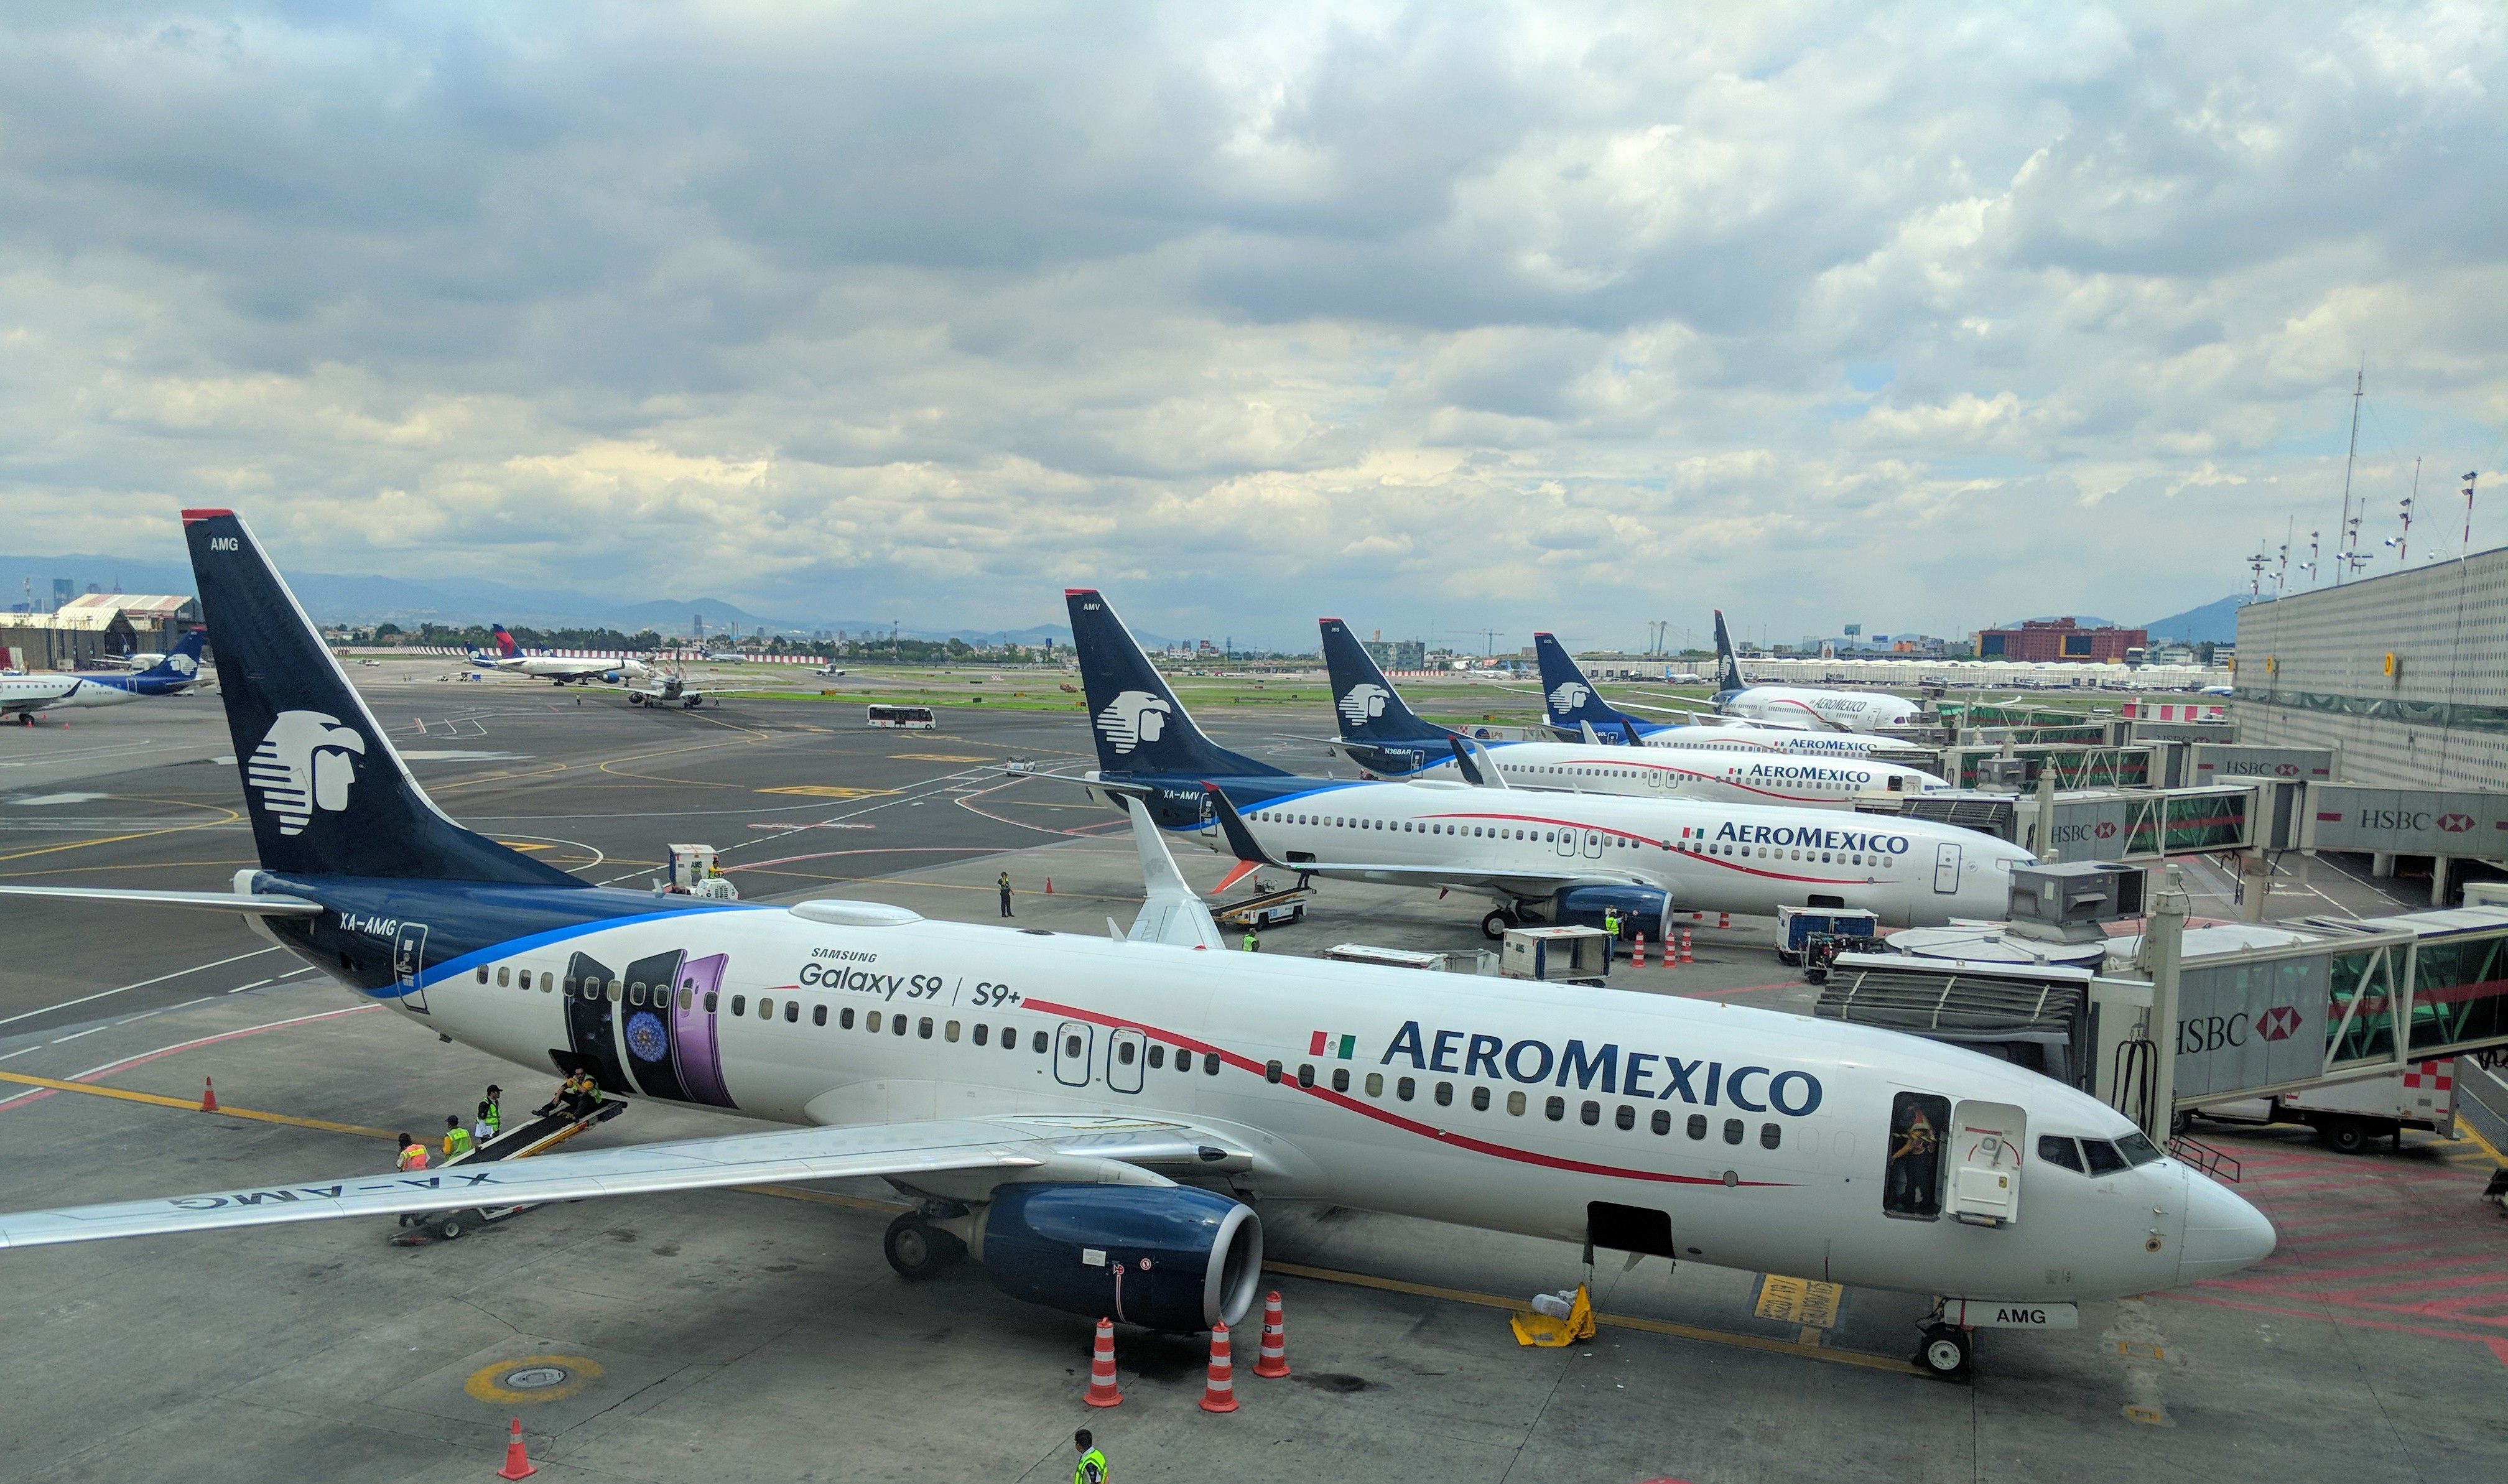 Aeromexico aircraft lined up at Mexico City International Airport